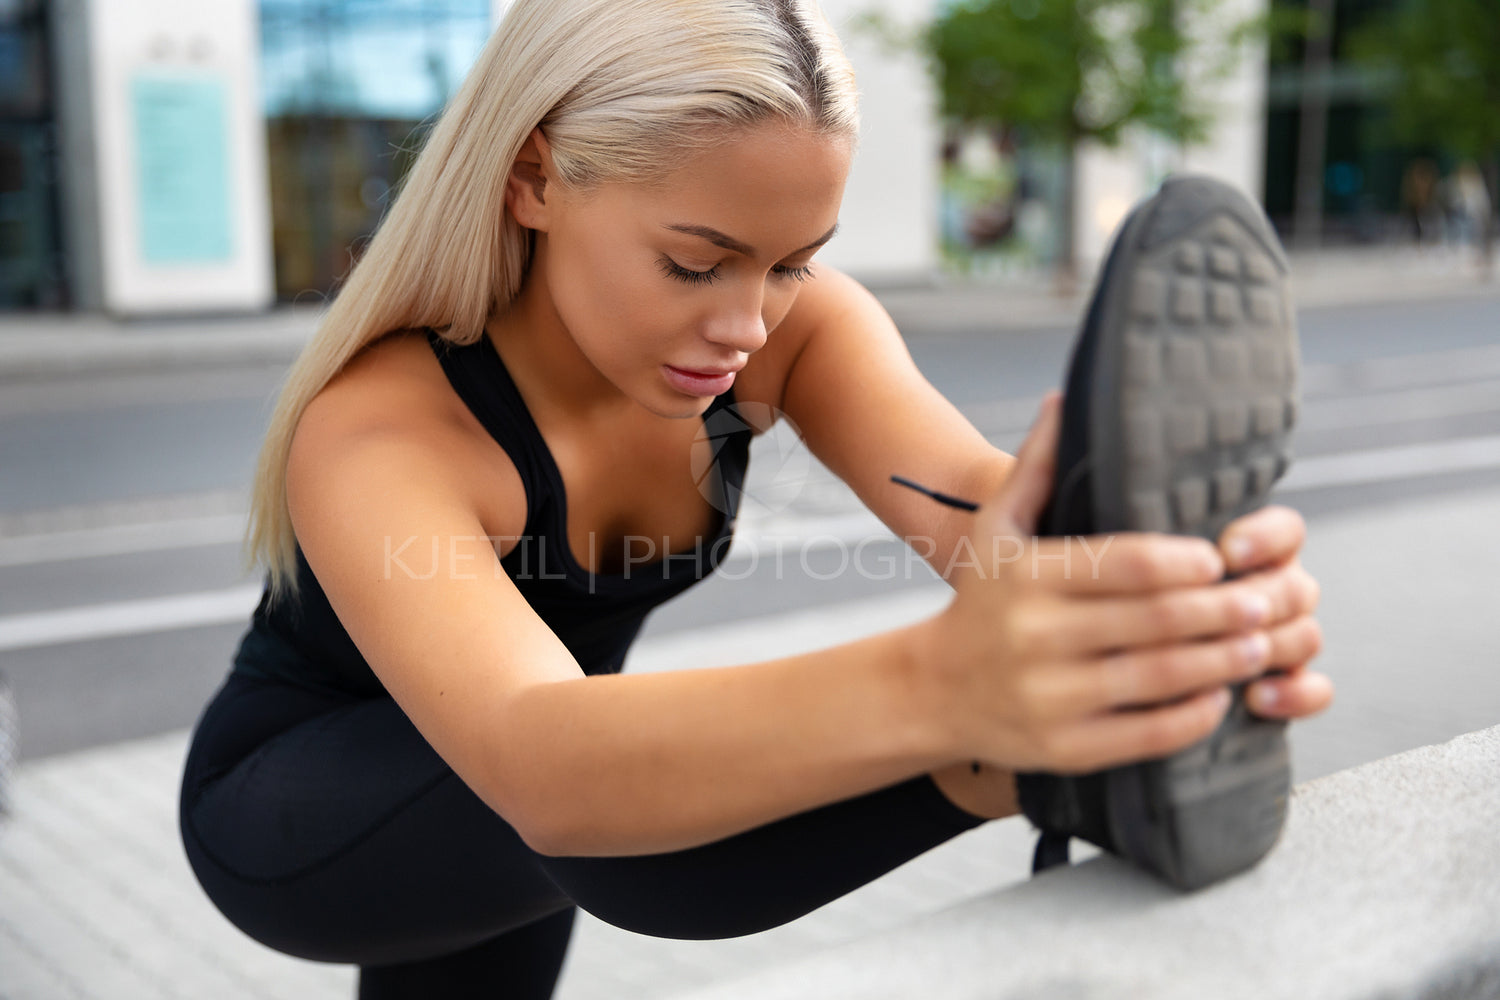 Gorgeous young Woman Doing Stretching Exercise At Sidewalk In City